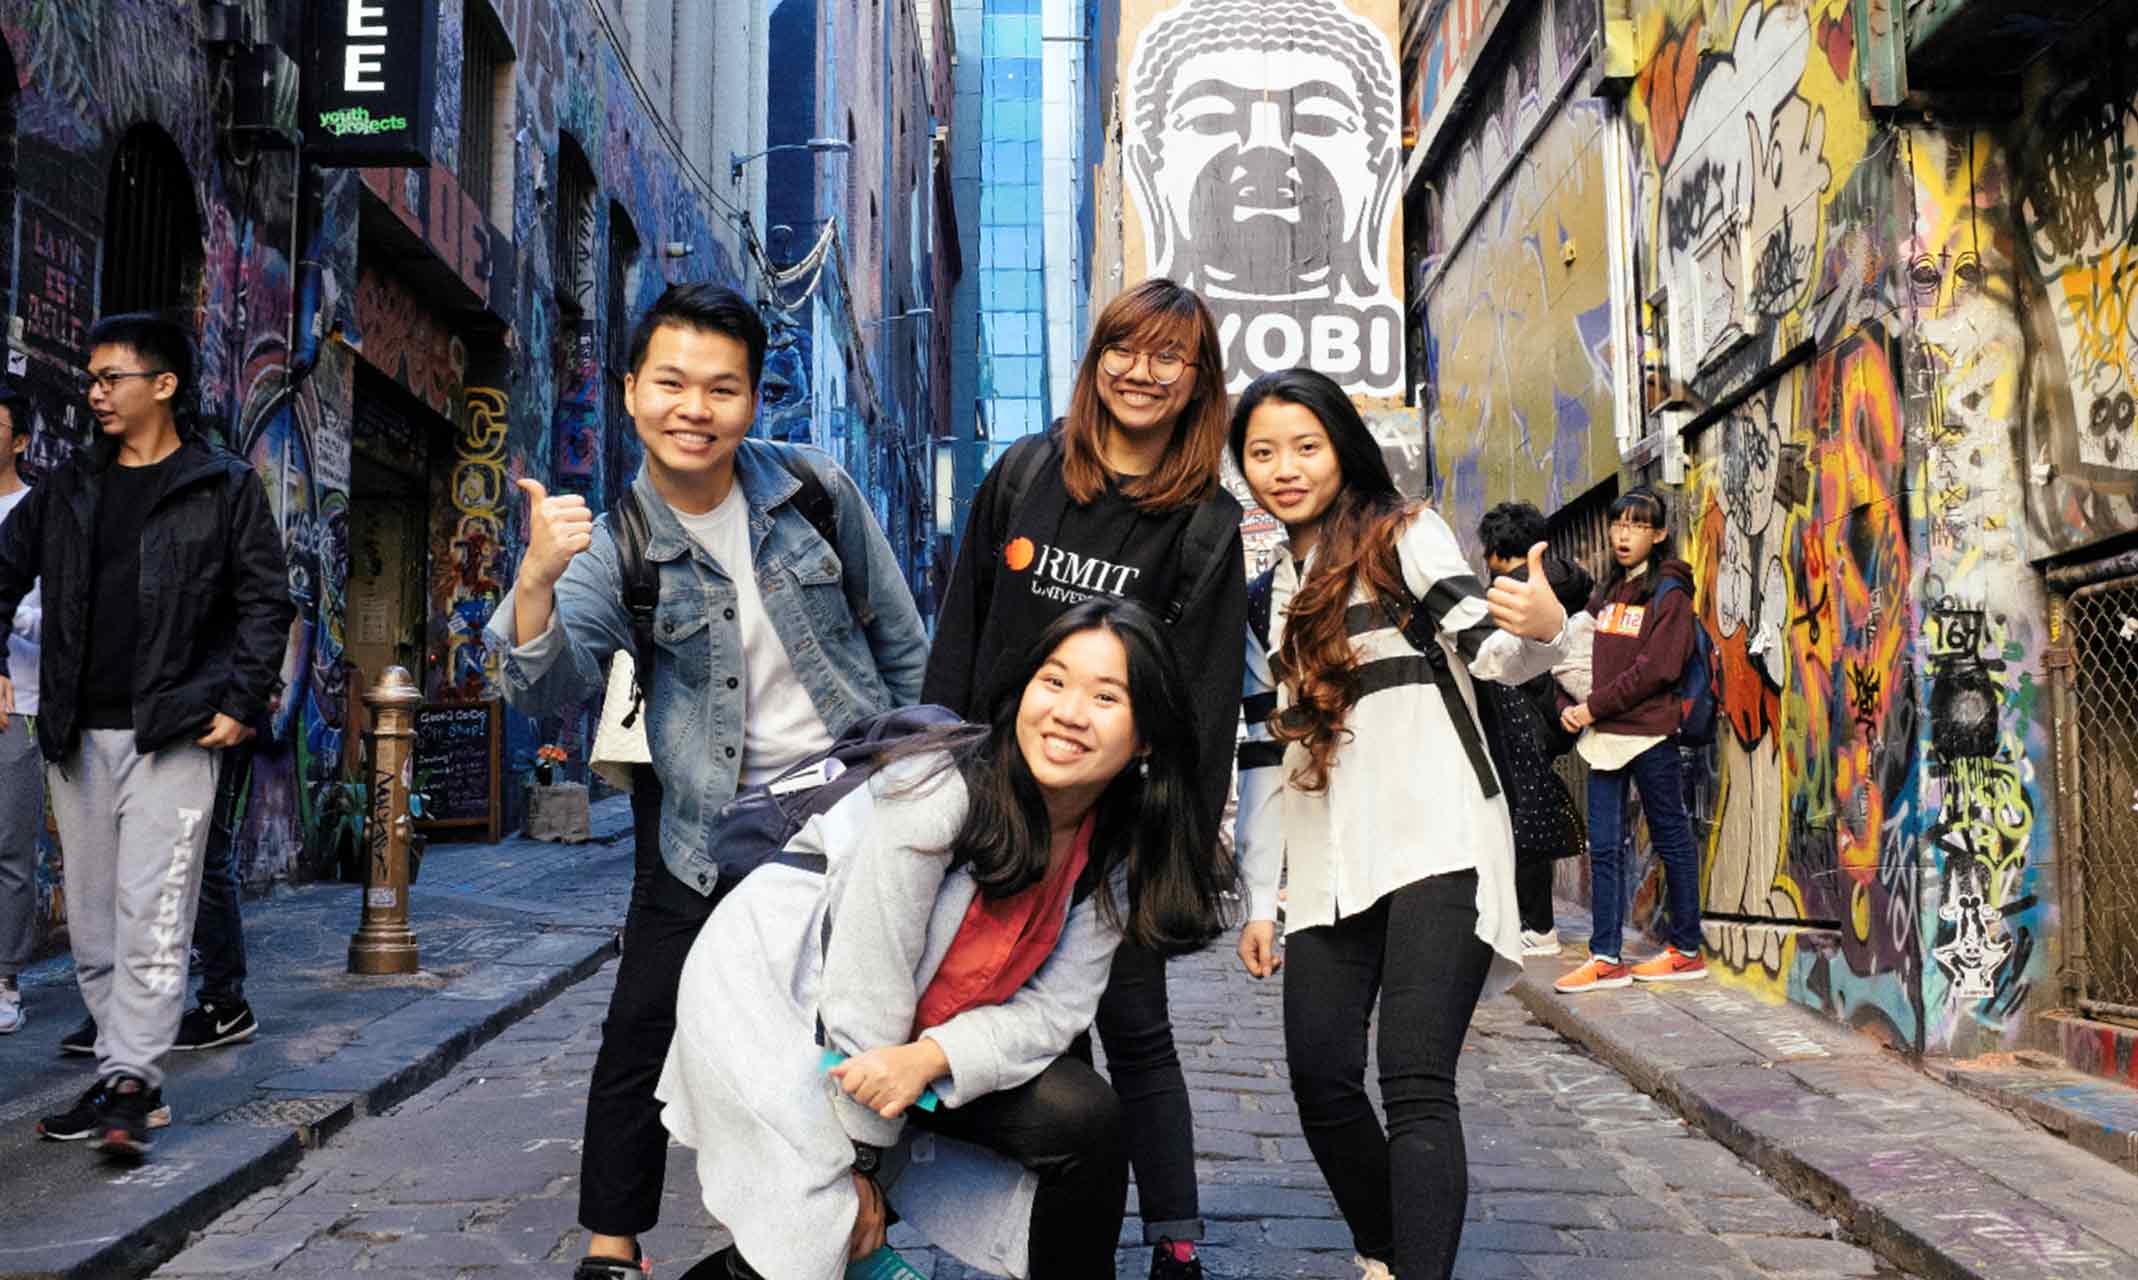 RMIT Training students in a Melbourne alley